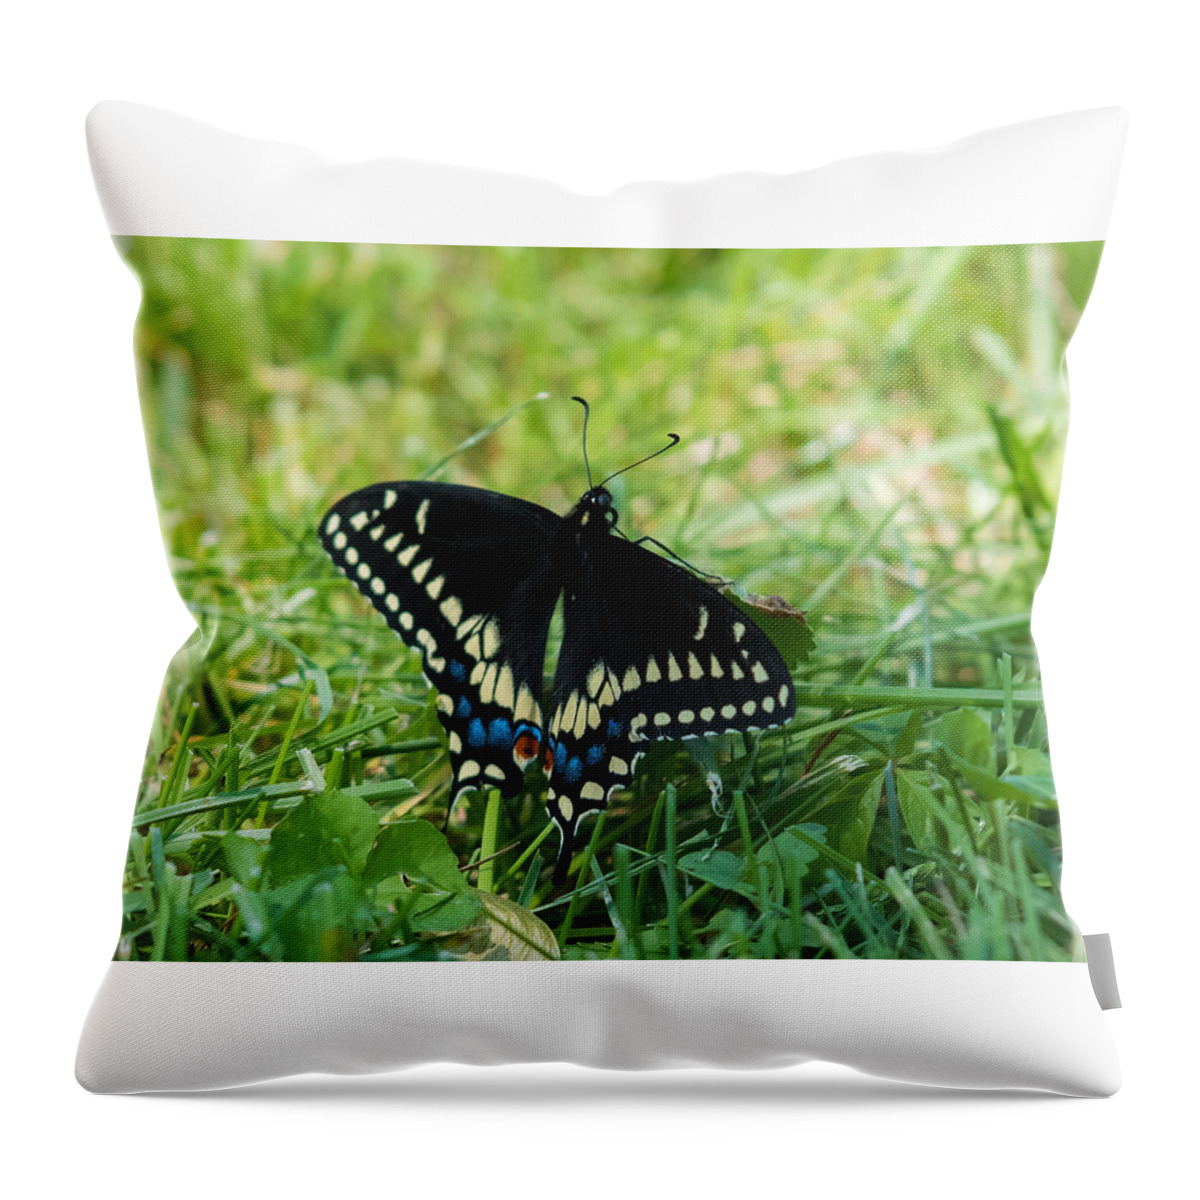 Black Swallowtail Butterfly Throw Pillow featuring the photograph Black Swallowtail Butterfly by Holden The Moment